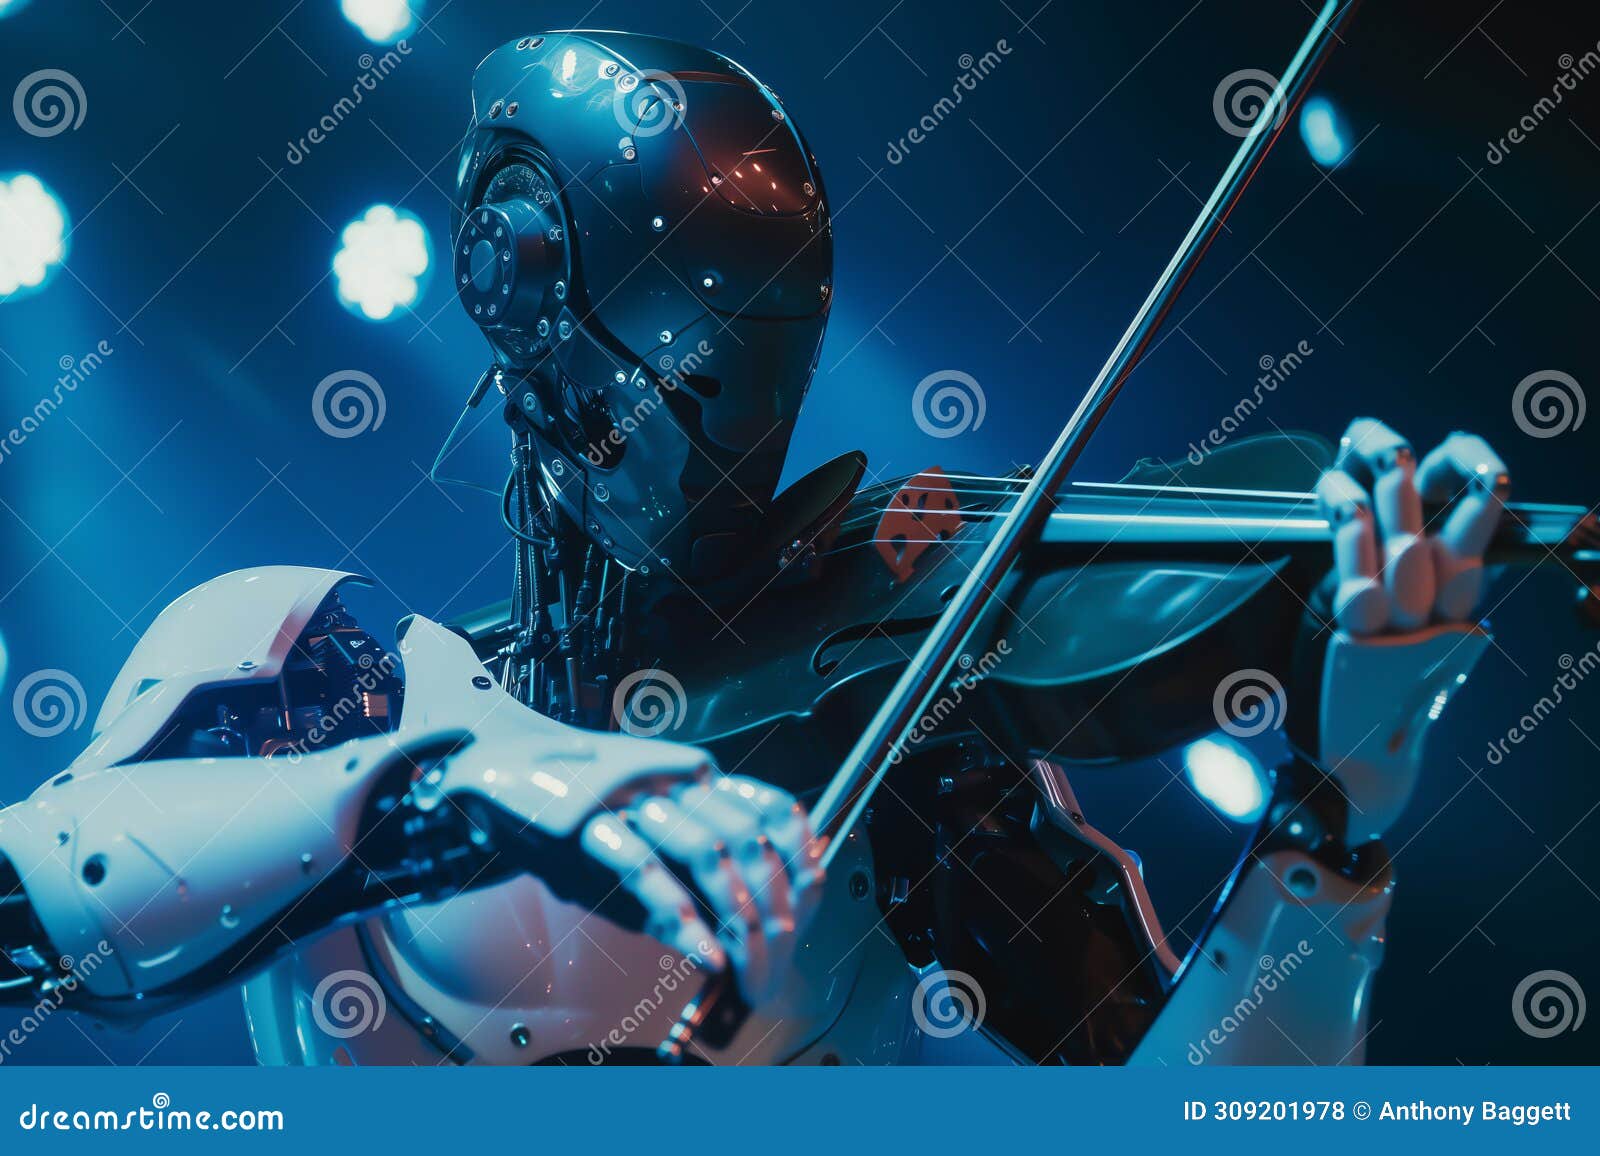 an android robot playing a violin at an orchestral classical music concert